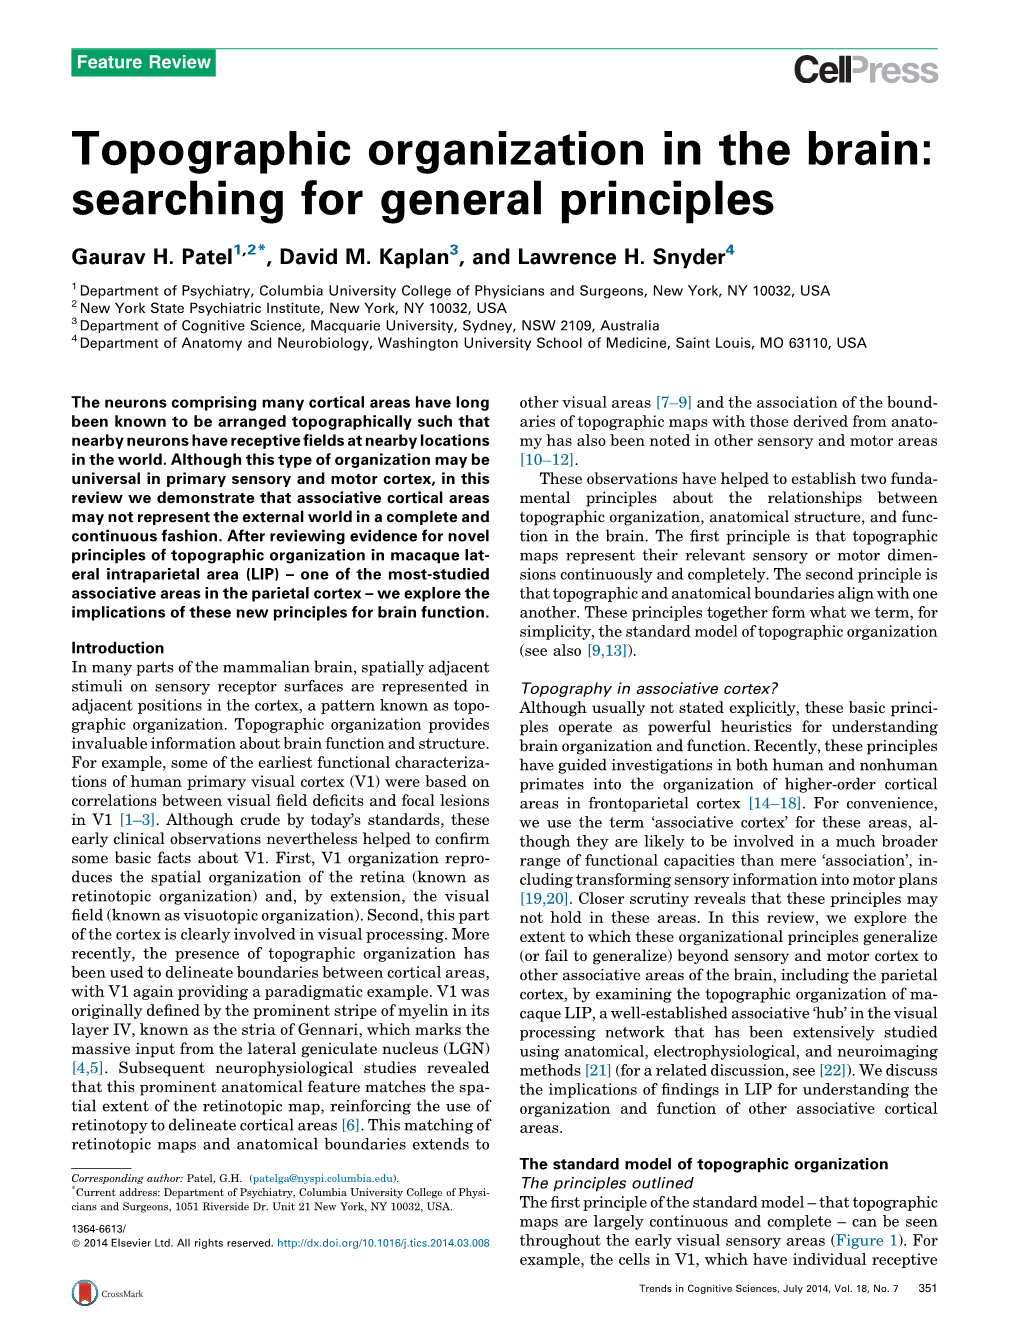 Topographic Organization in the Brain: Searching for General Principles